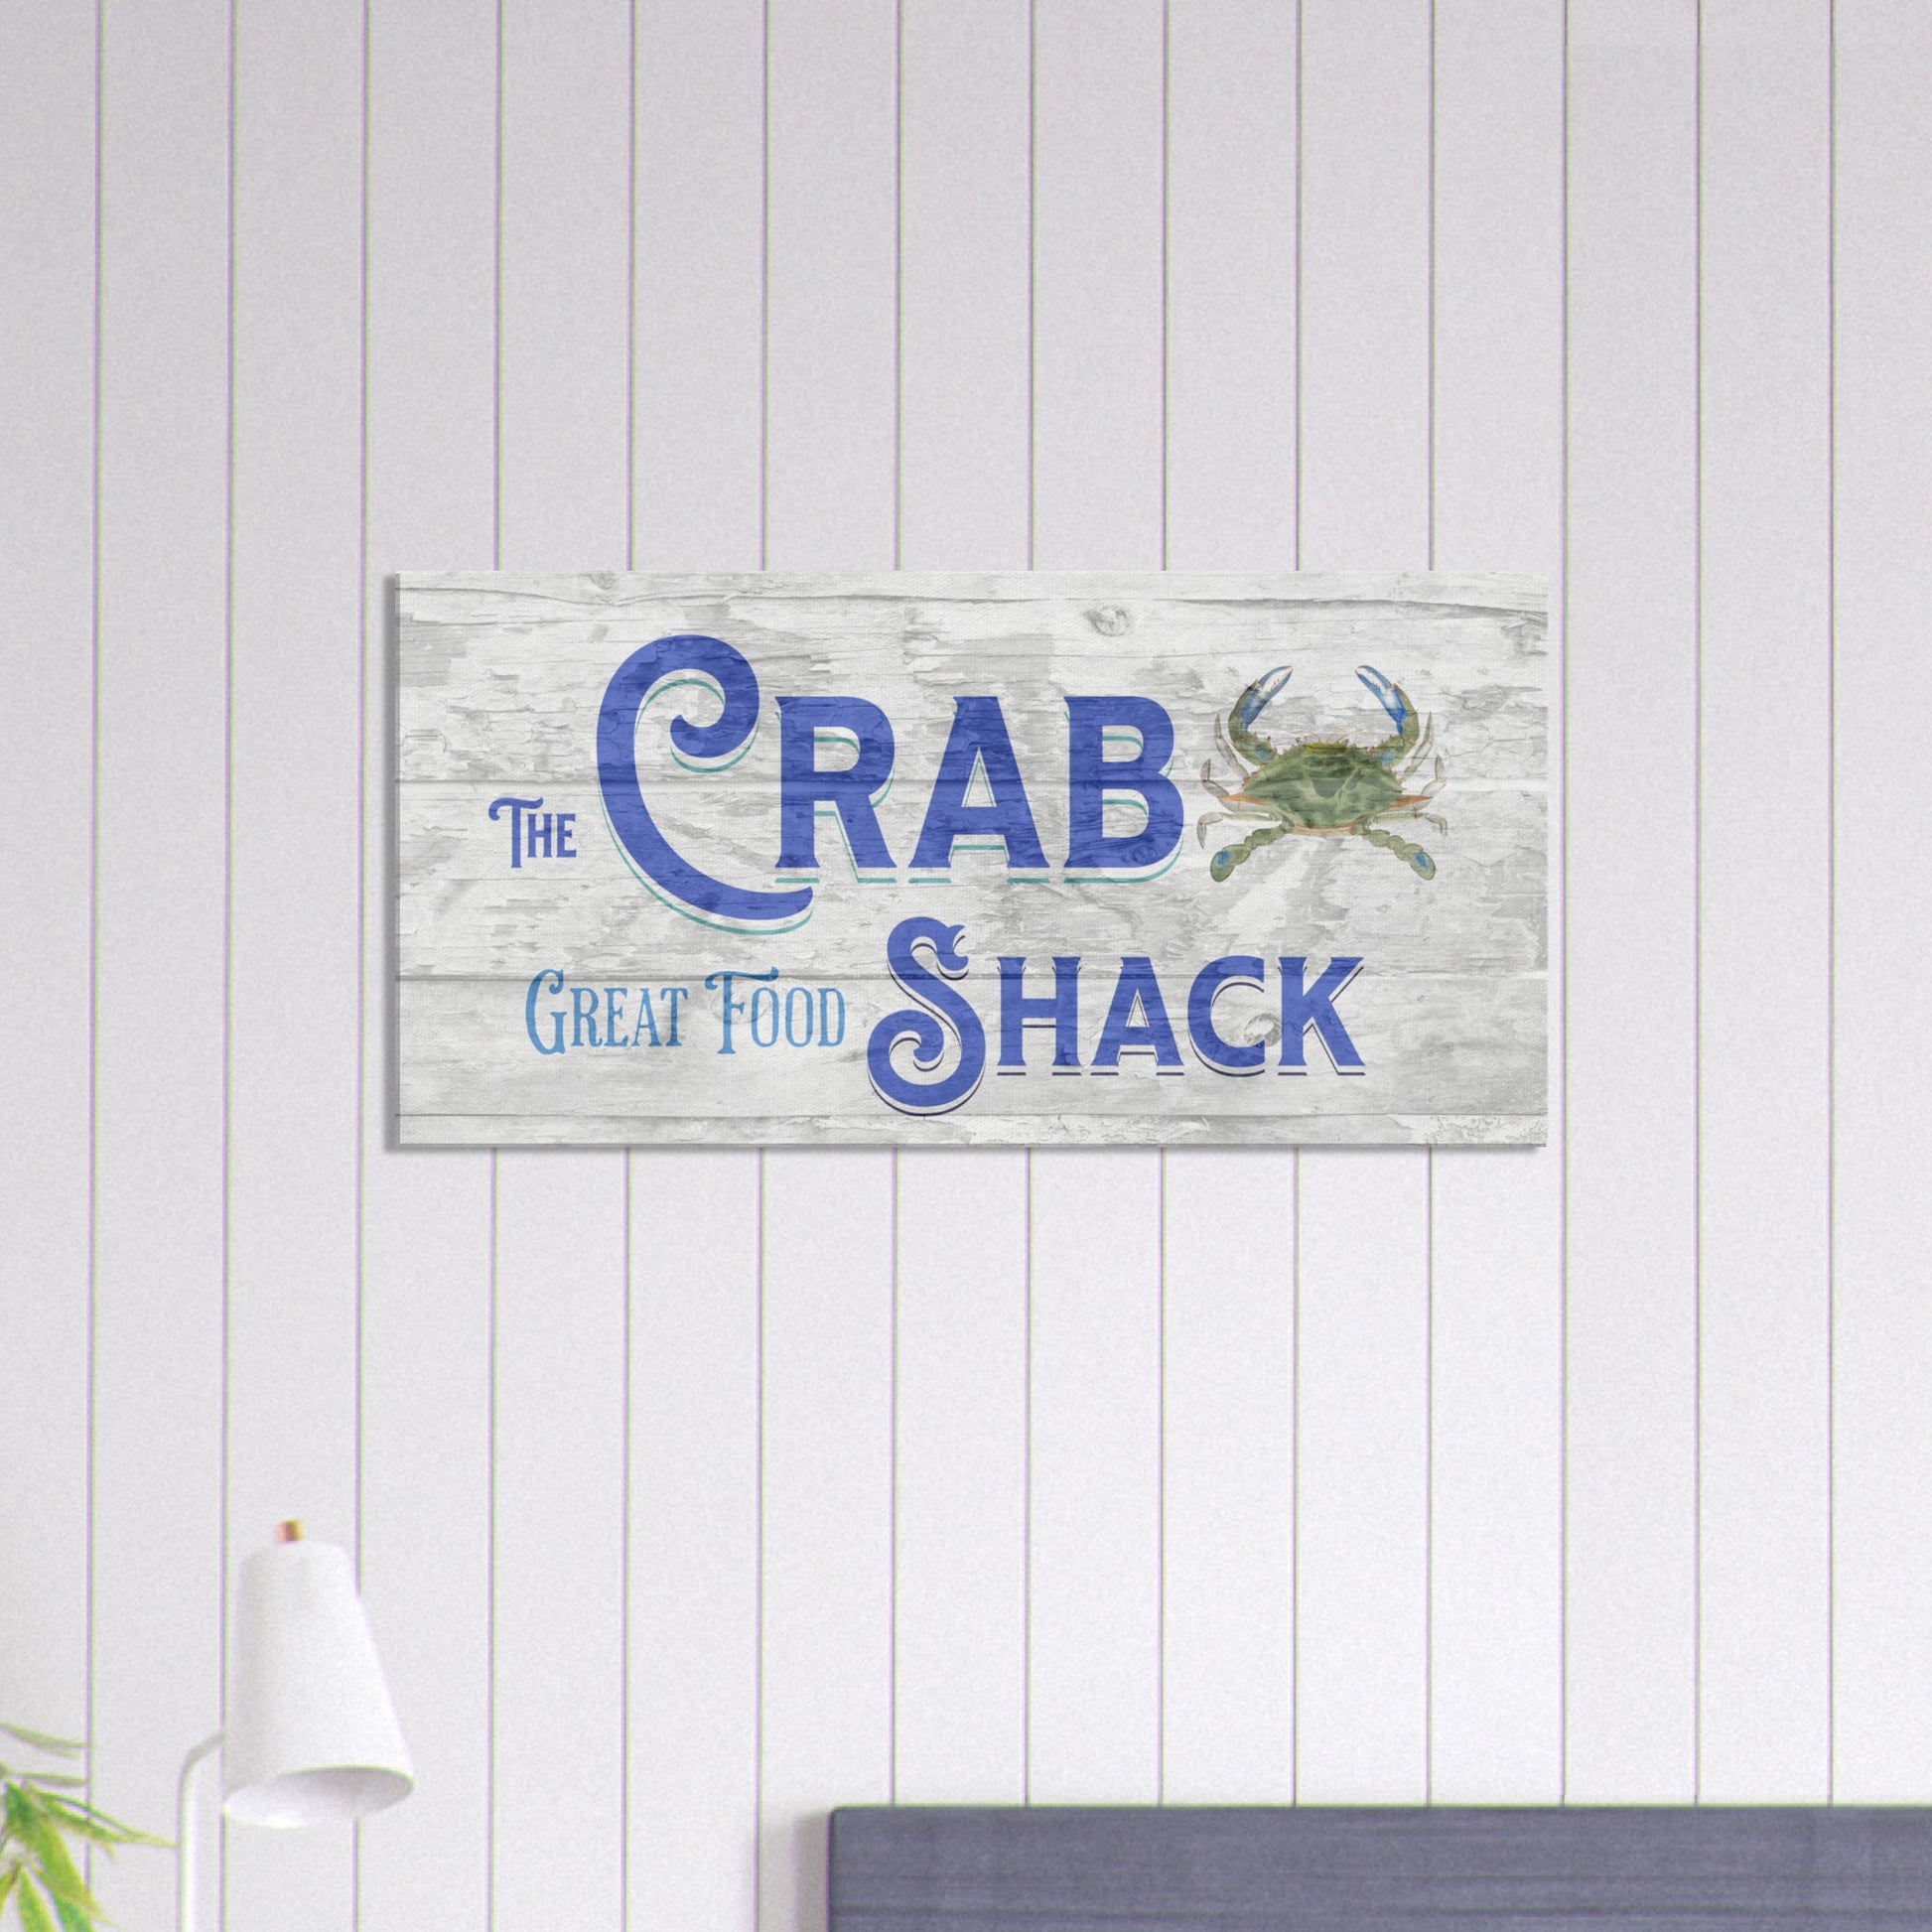 The Crab Shack Canvas Wall Print on Caribbean Rays